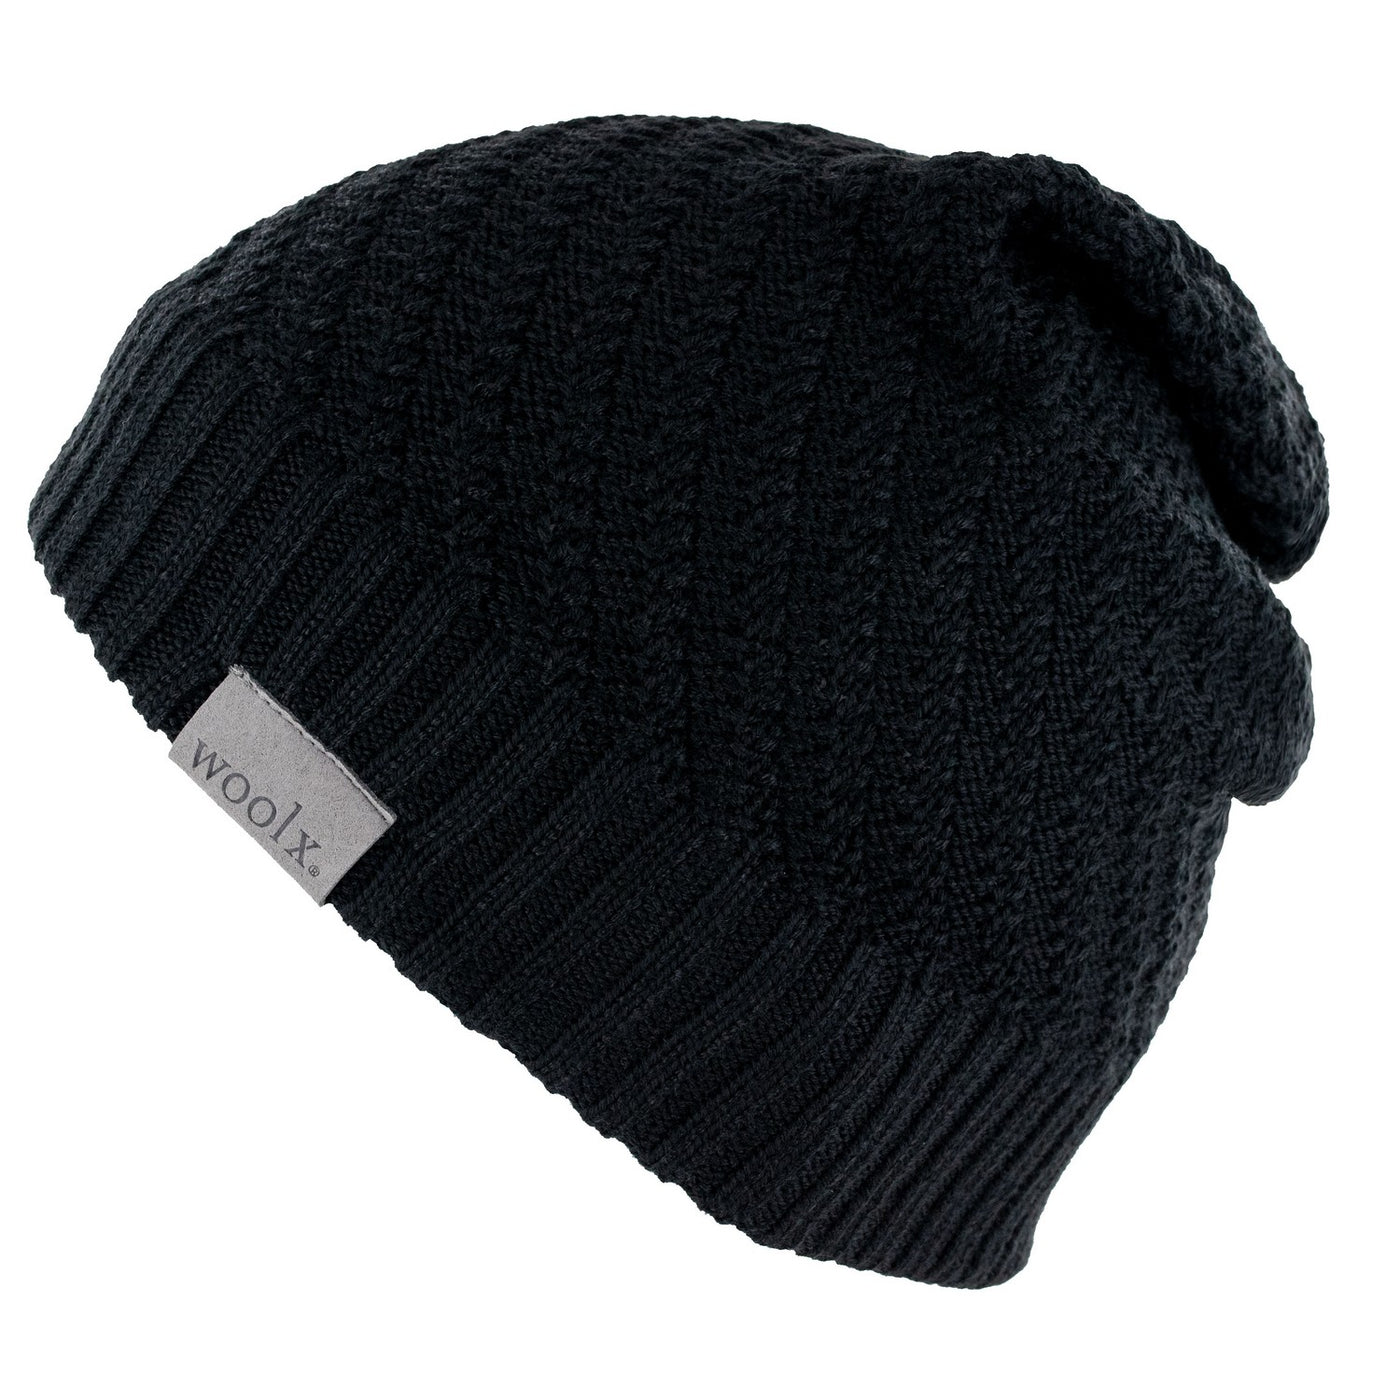 Women's Merino Wool Hat - Warm Hat For Cold Weather - Free Shipping – Woolx